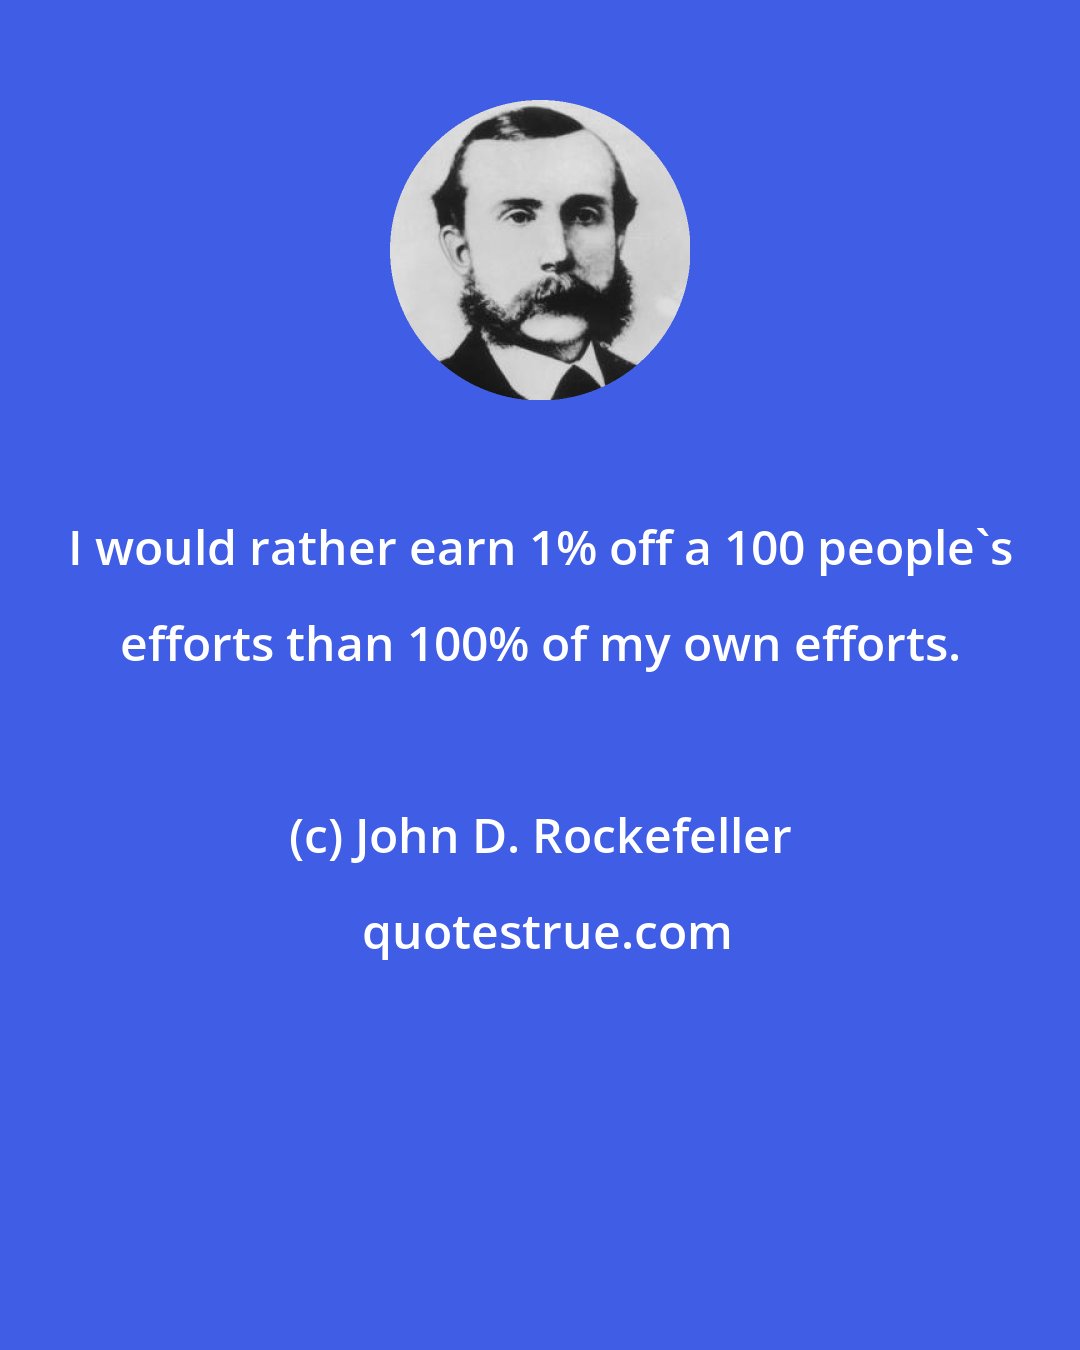 John D. Rockefeller: I would rather earn 1% off a 100 people's efforts than 100% of my own efforts.